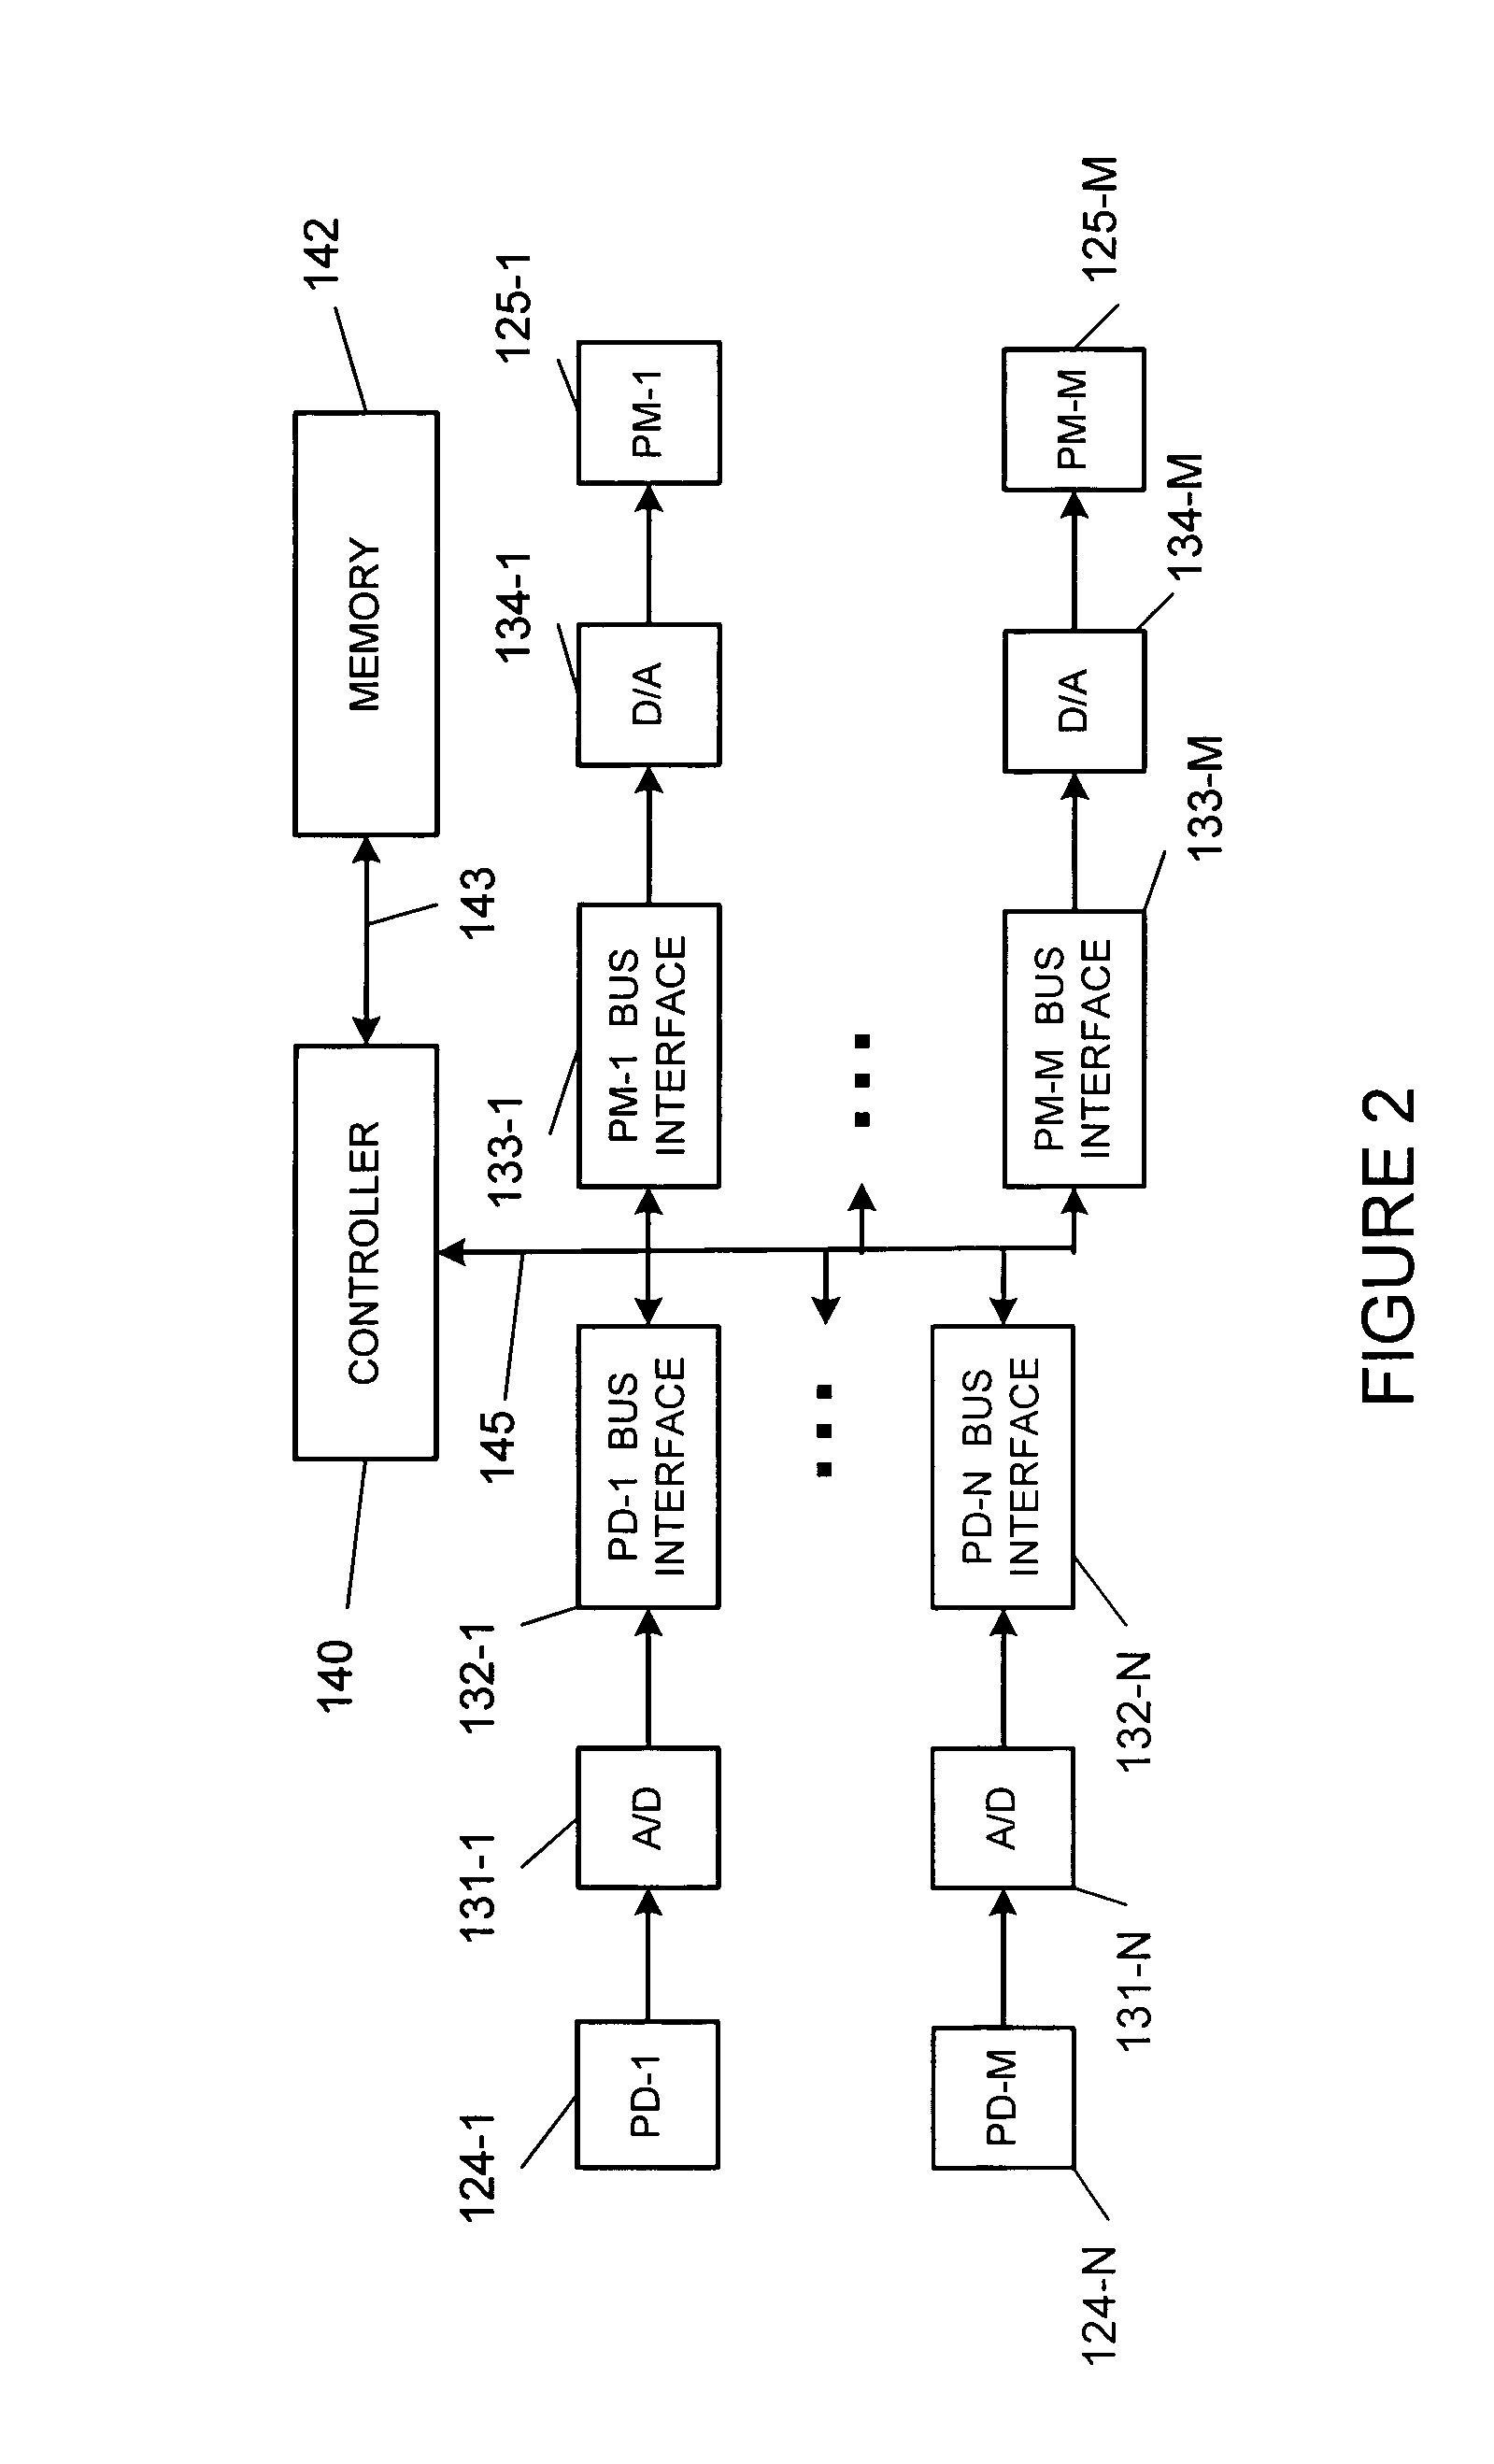 Electronically controllable arrayed waveguide gratings